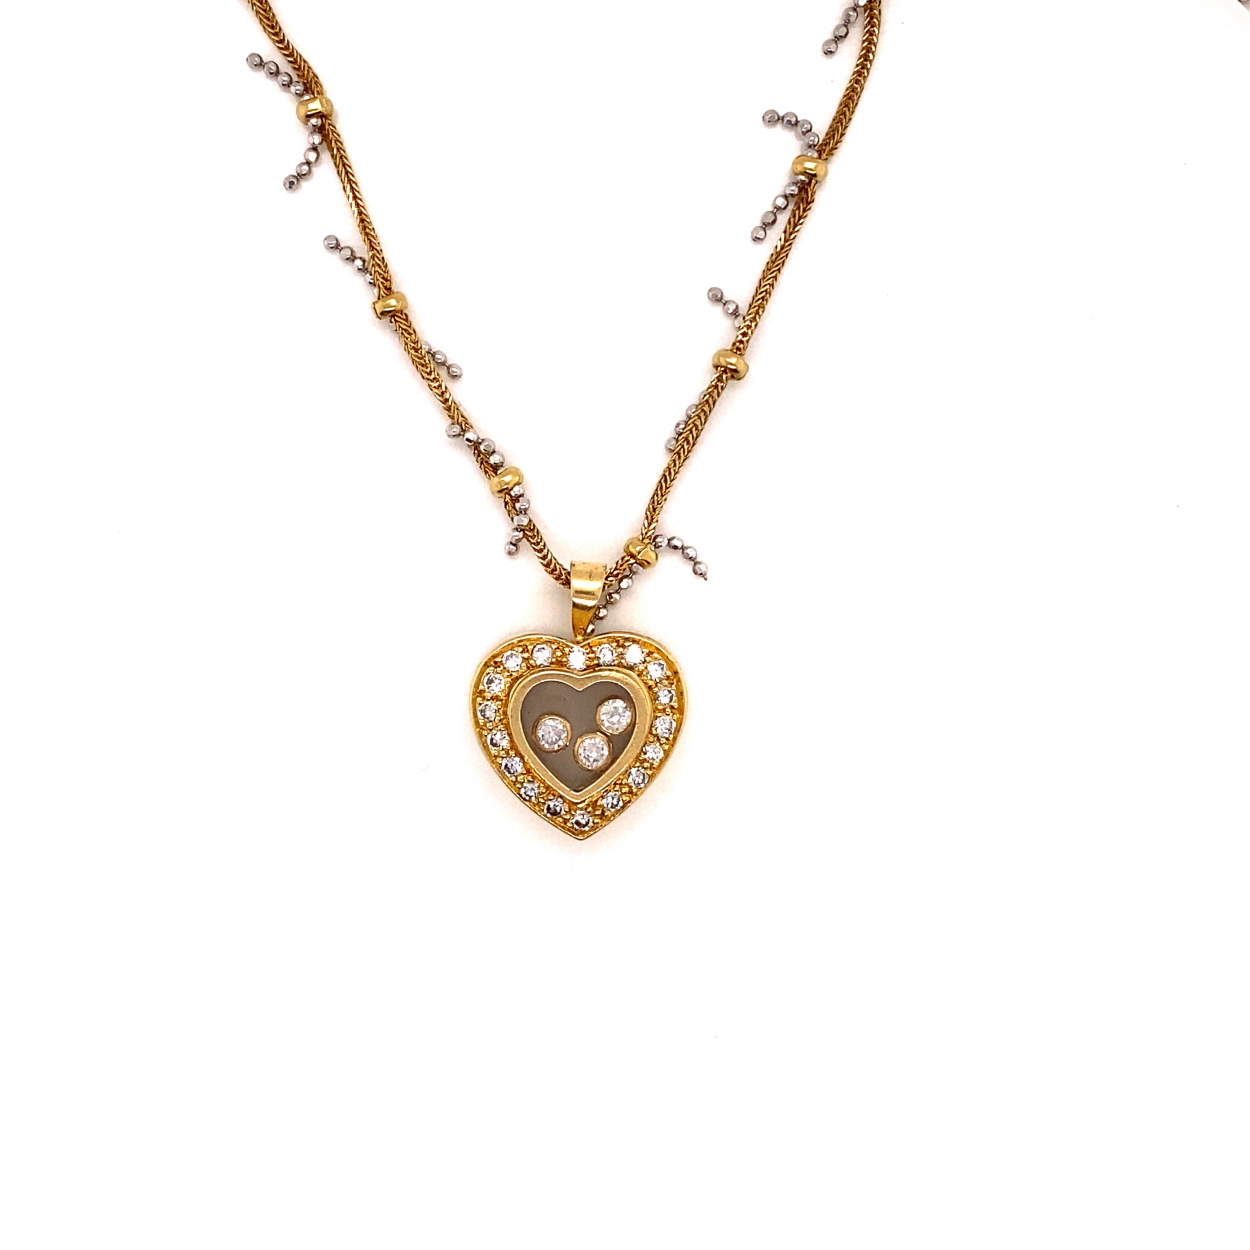 AN PRECIOUS YELLOW METAL AND DIAMOND FLOATING HEART PENDANT, ASSESSES AS 18CT FINENESS, SUSPENDED ON - Image 2 of 3